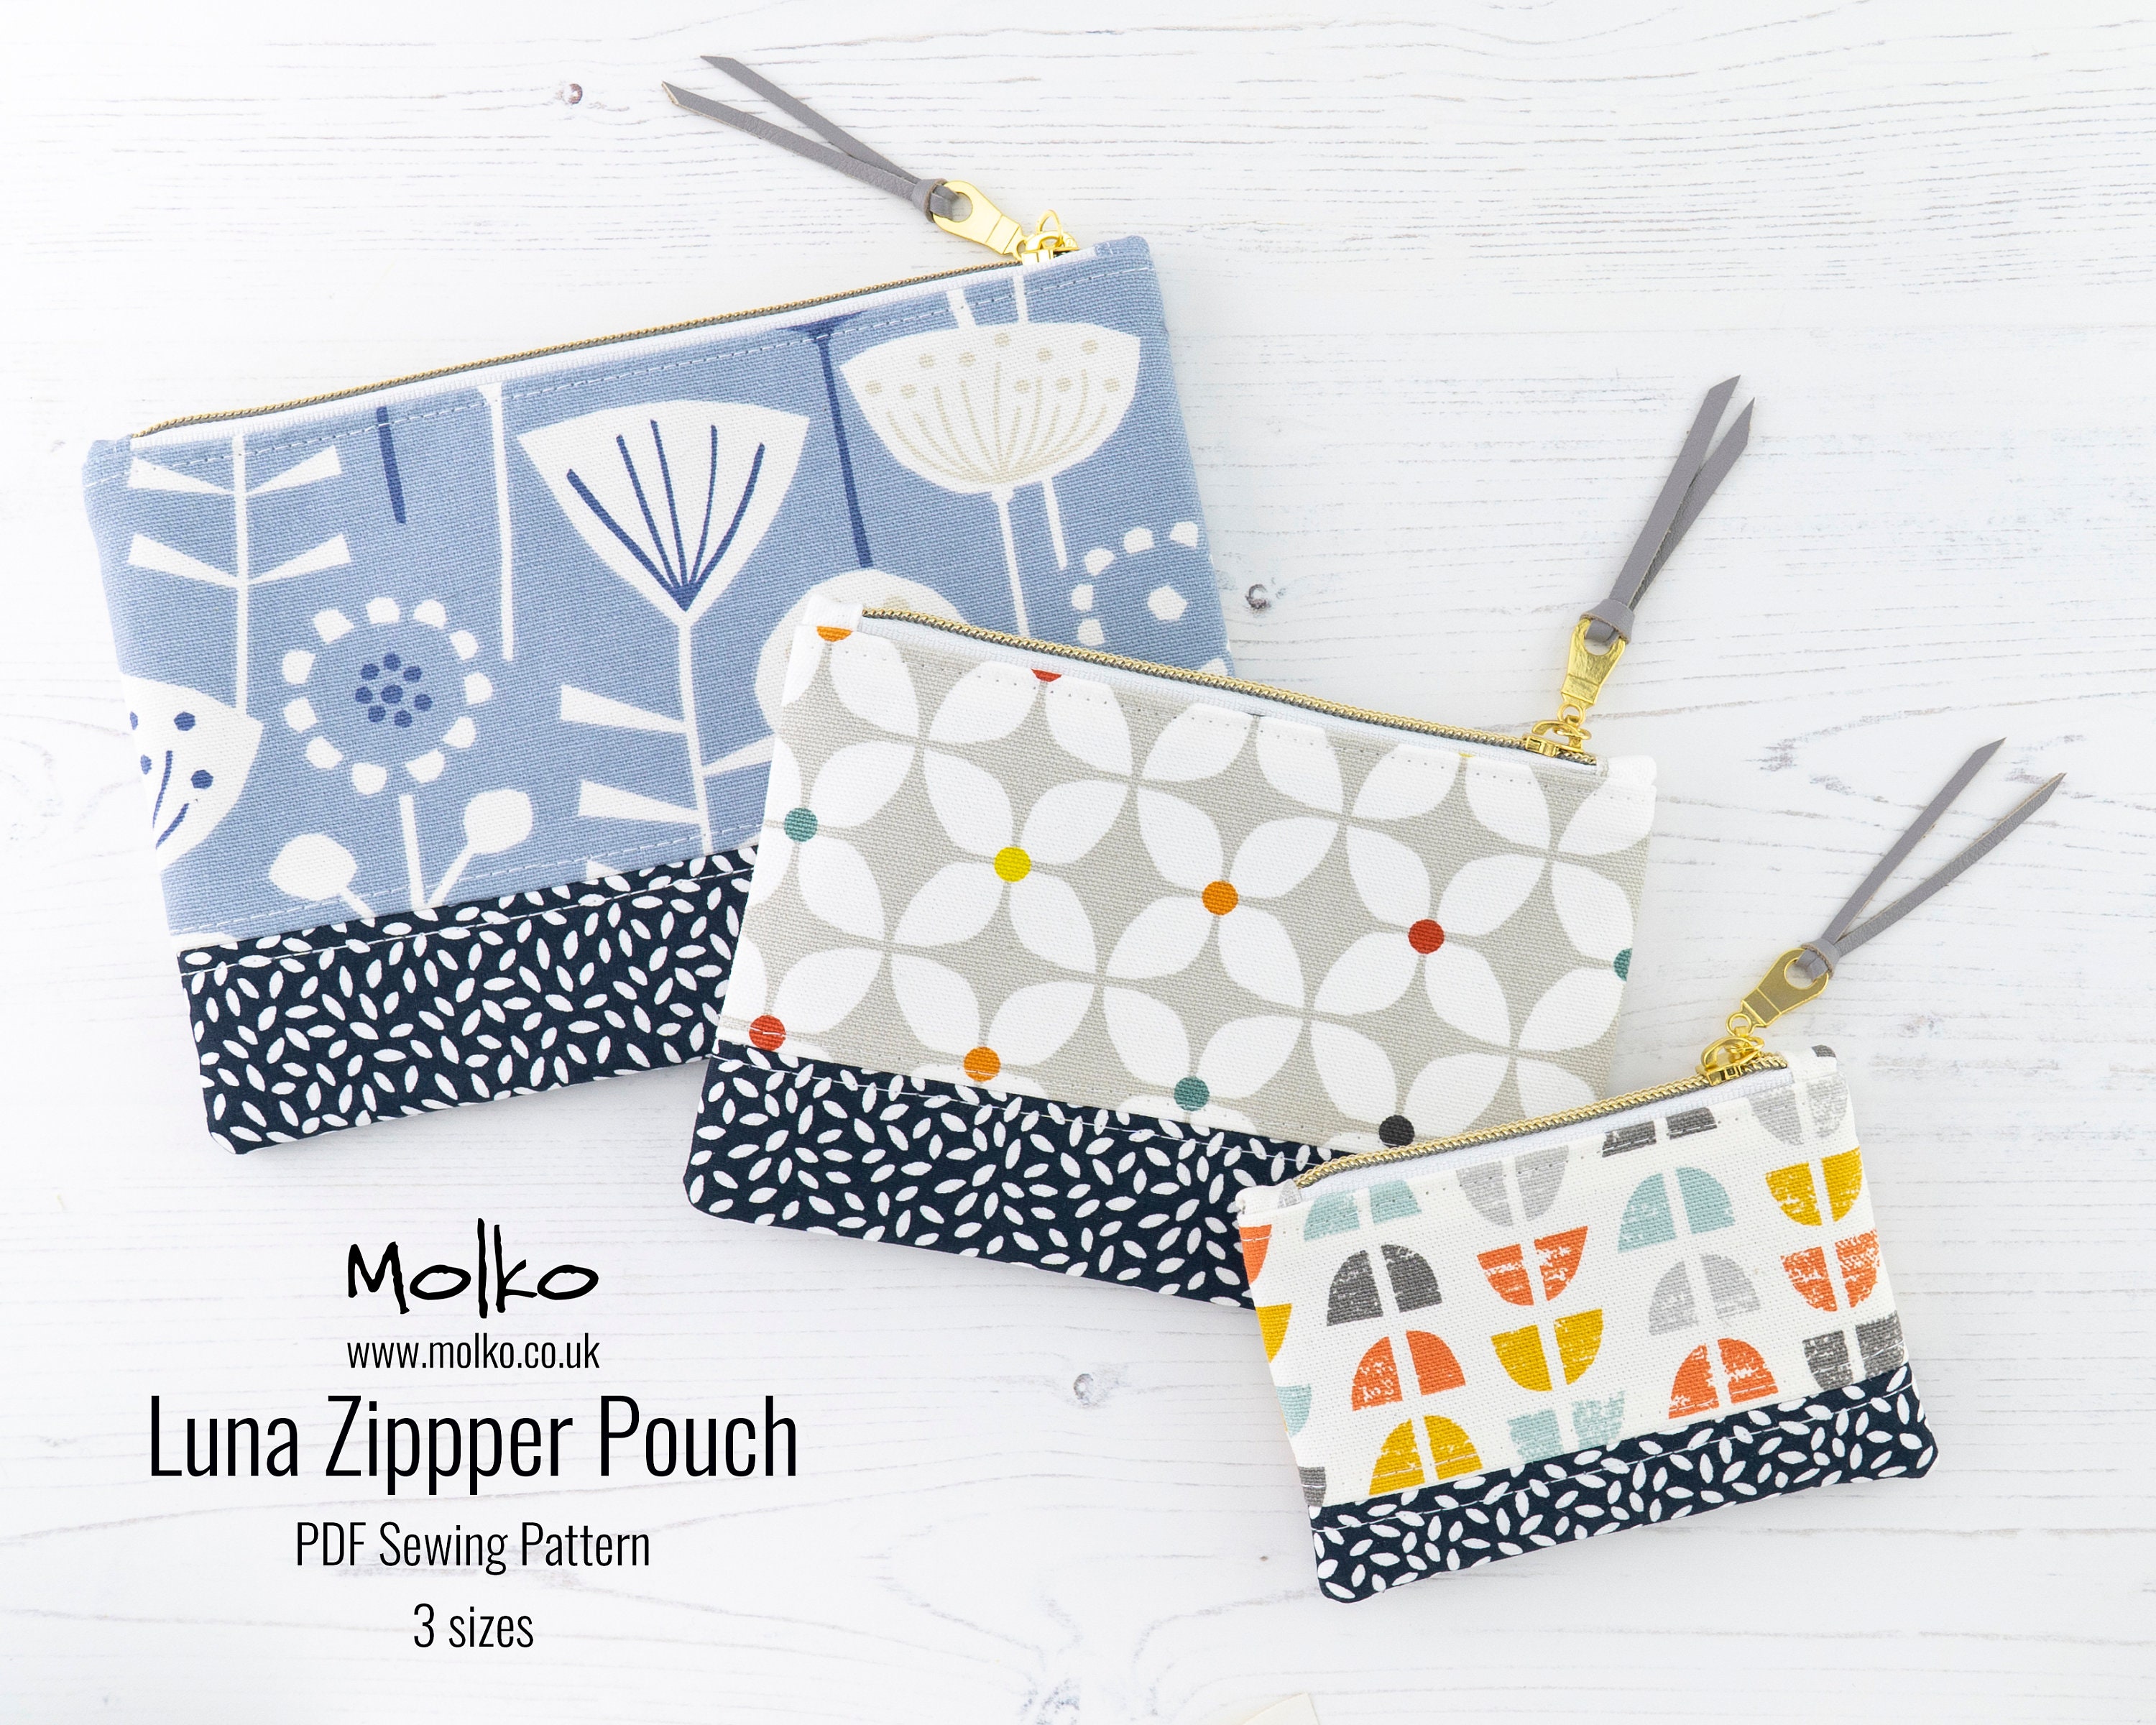 Zipper Pouch PDF Sewing Pattern / Sewing Tutorial / Project | Etsy